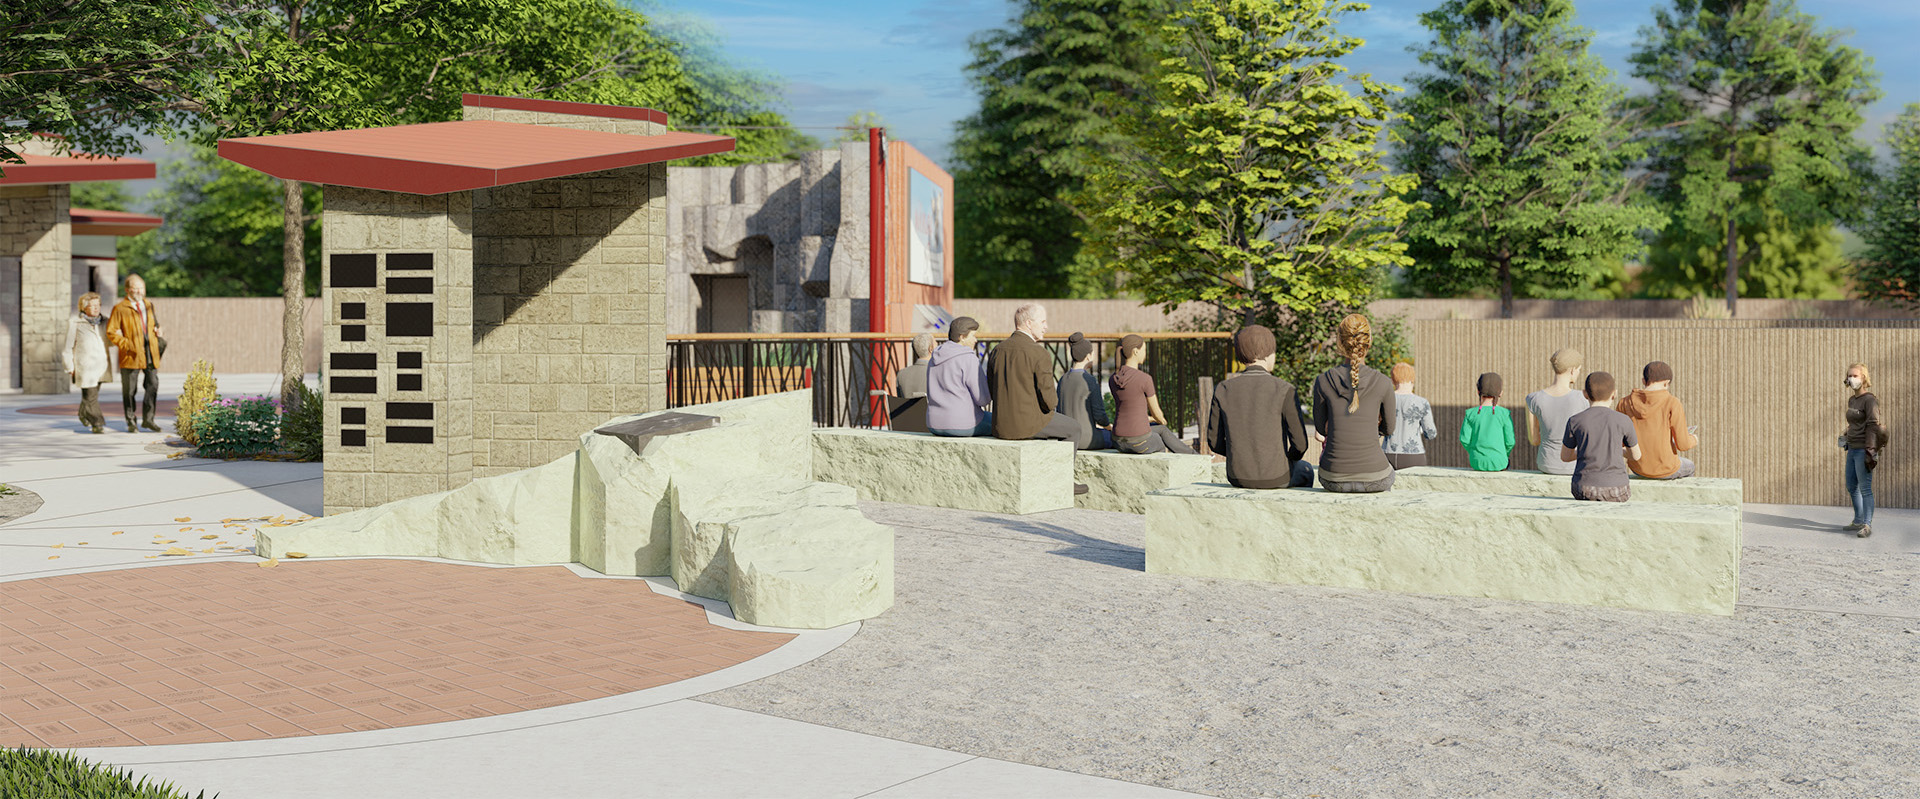 A rendering of the outdoor classroom showcasing the benches and bricks